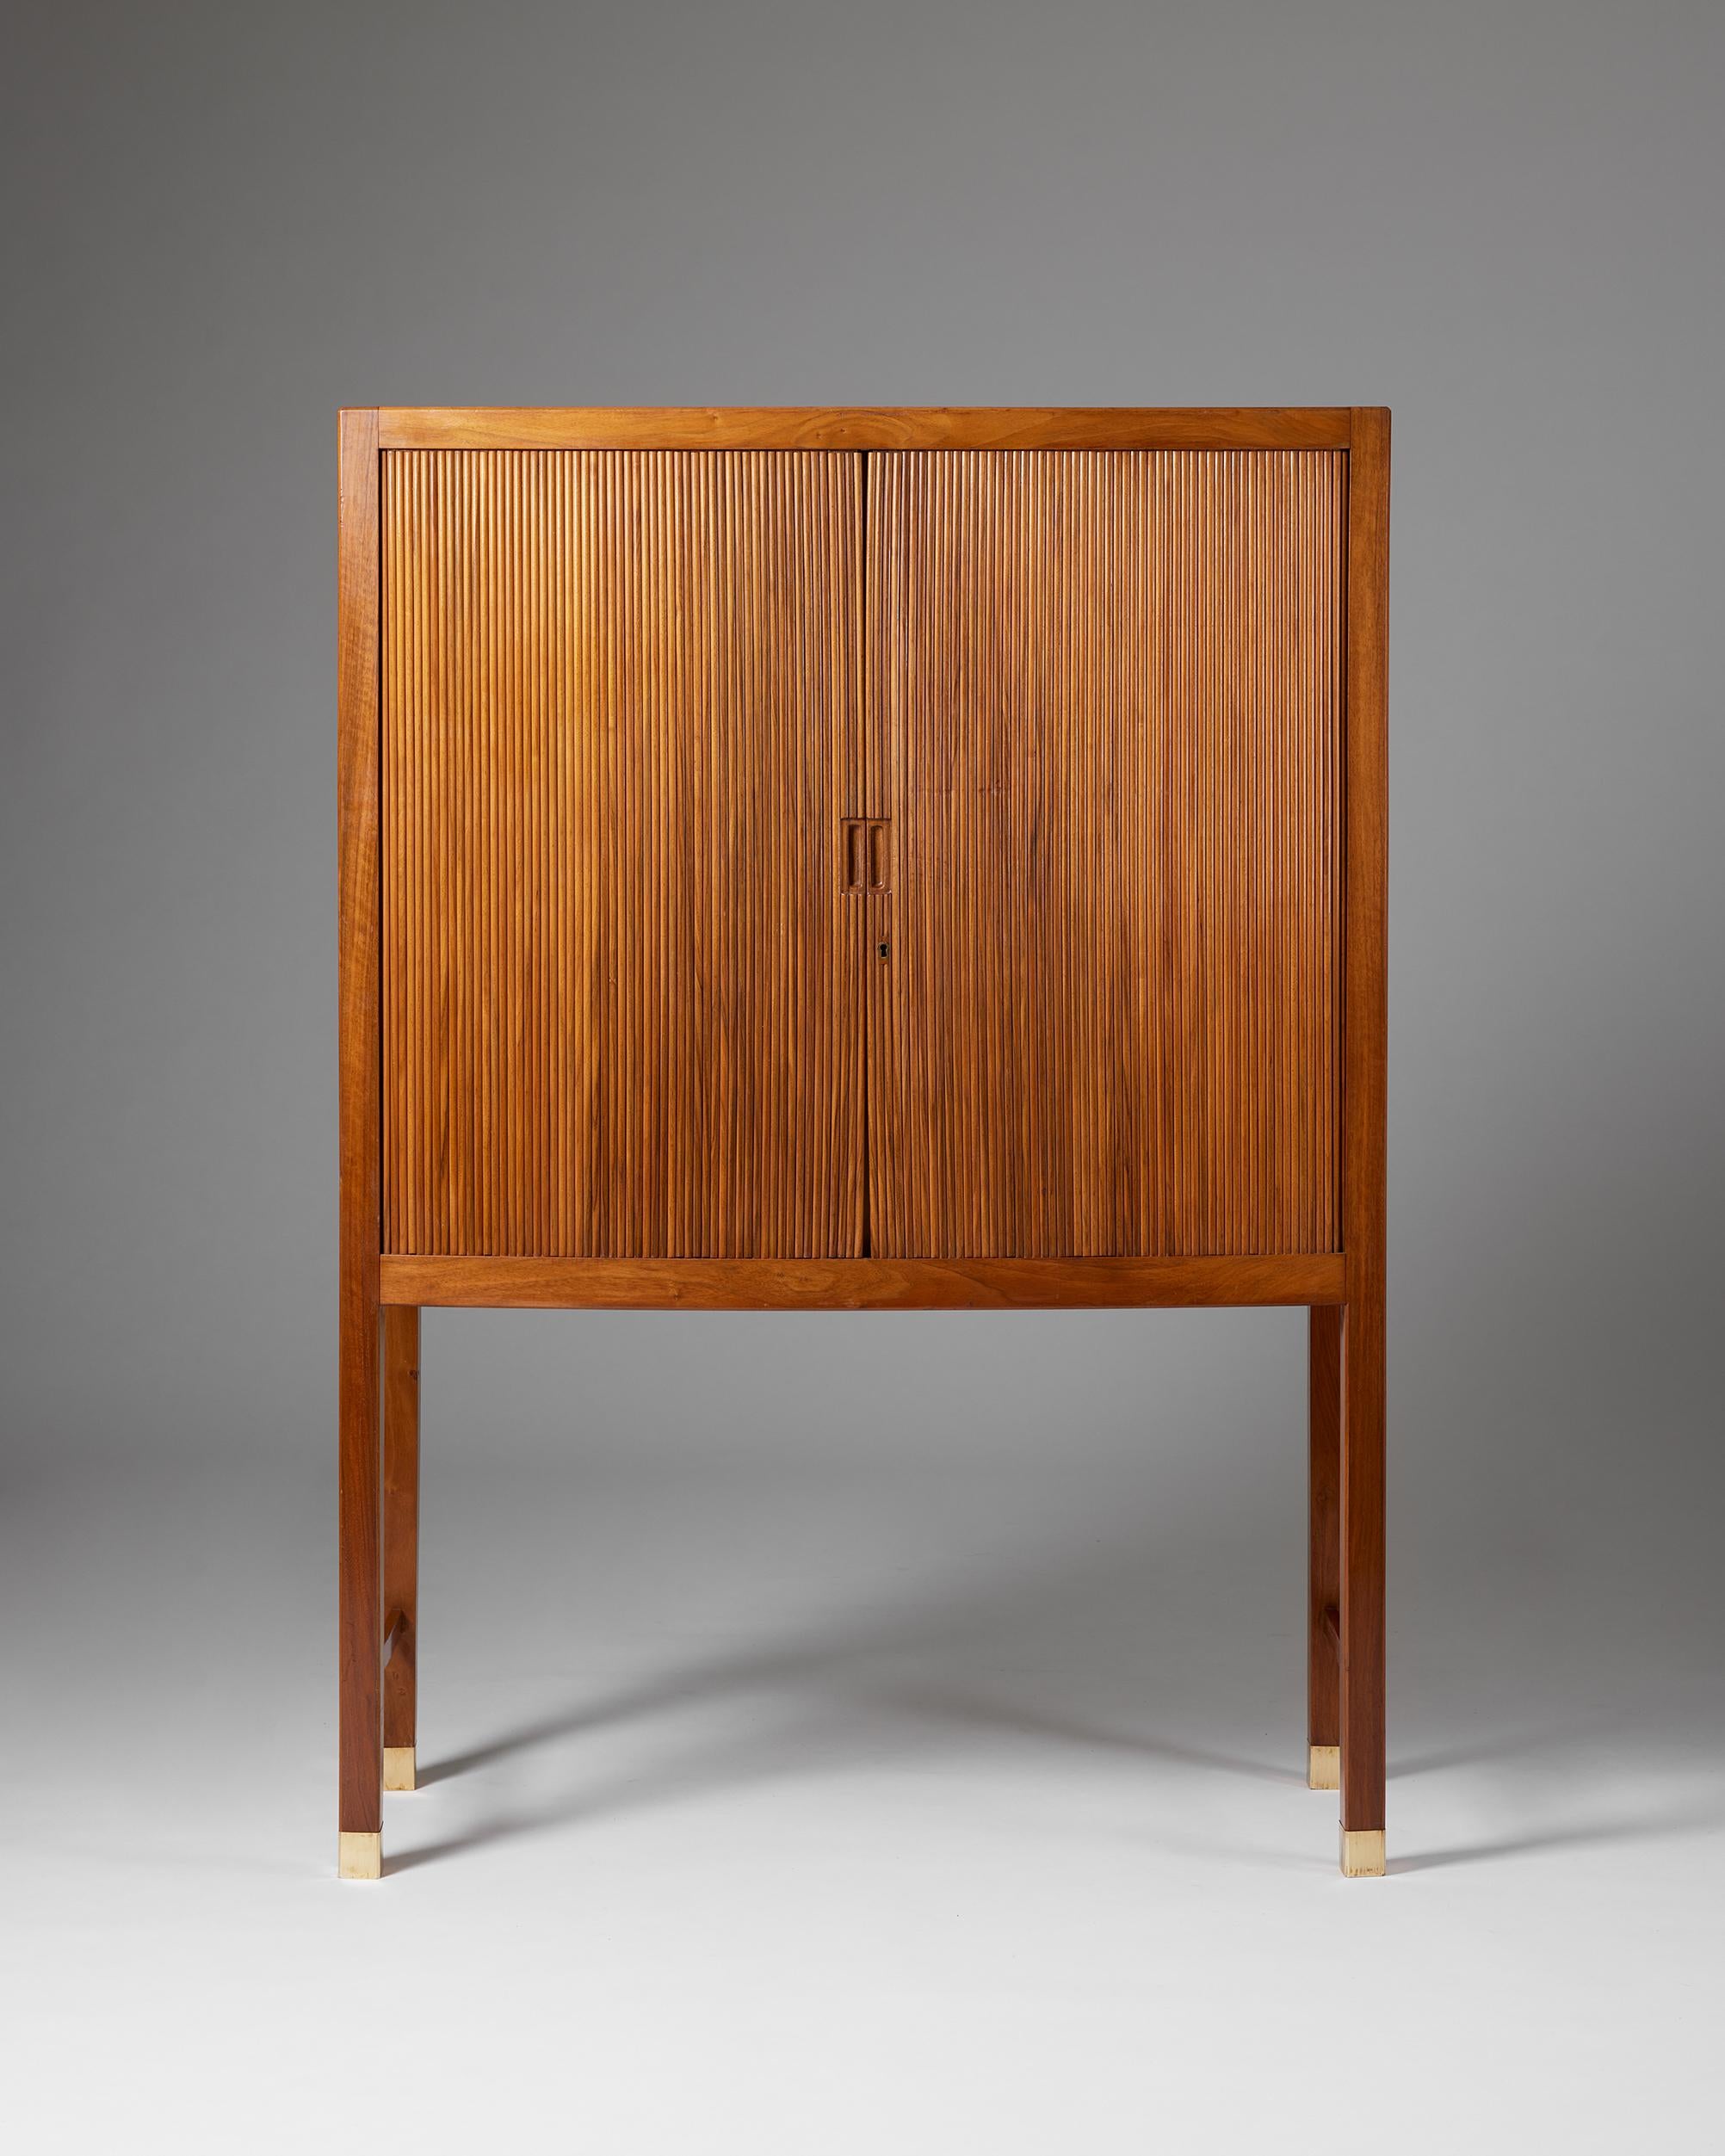 Cabinet with tambour doors designed by a Danish Cabinetmaker,
Denmark, 1950s.

Walnut and brass.

H: 140 cm
W: 100 cm
D: 44 cm